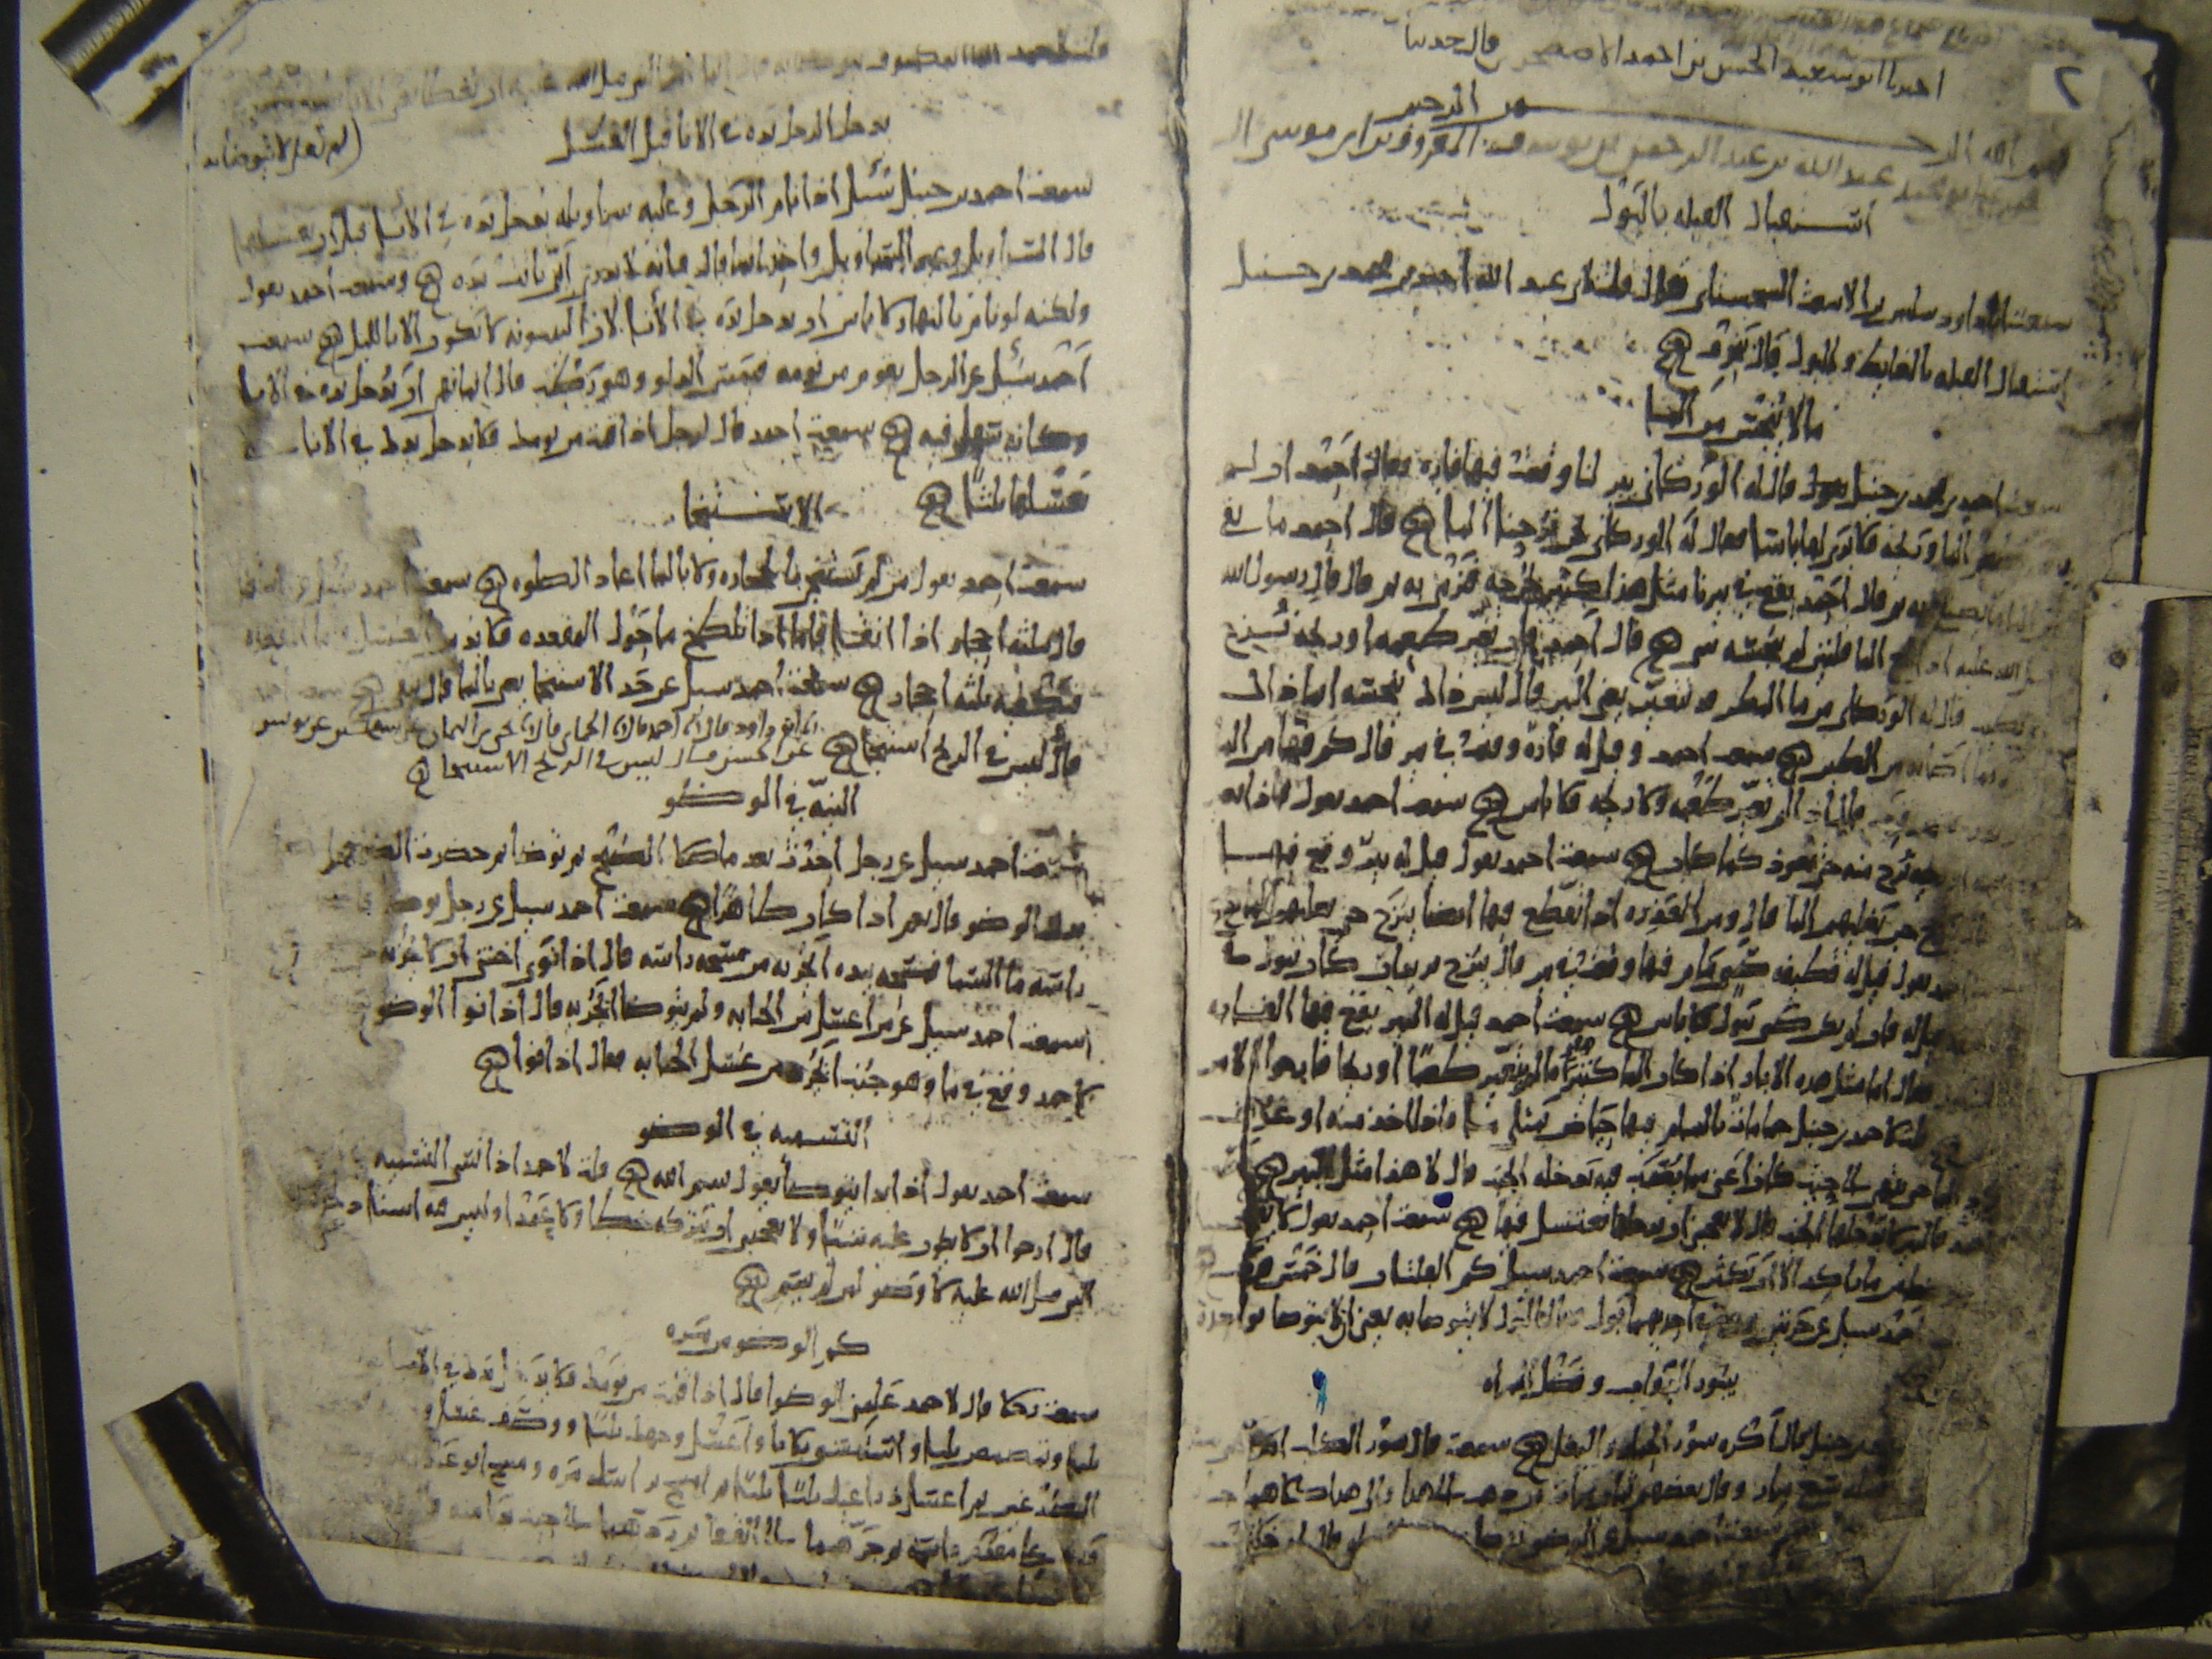 Legal questions of Abu Dawud al-Sijistani addressed to Ibn Hanbal. One of the oldest literary manuscripts of the Islamic world, produced in Rabi I 266 (October 879). Privately owned copy (source: Wikipedia, Public Domain)